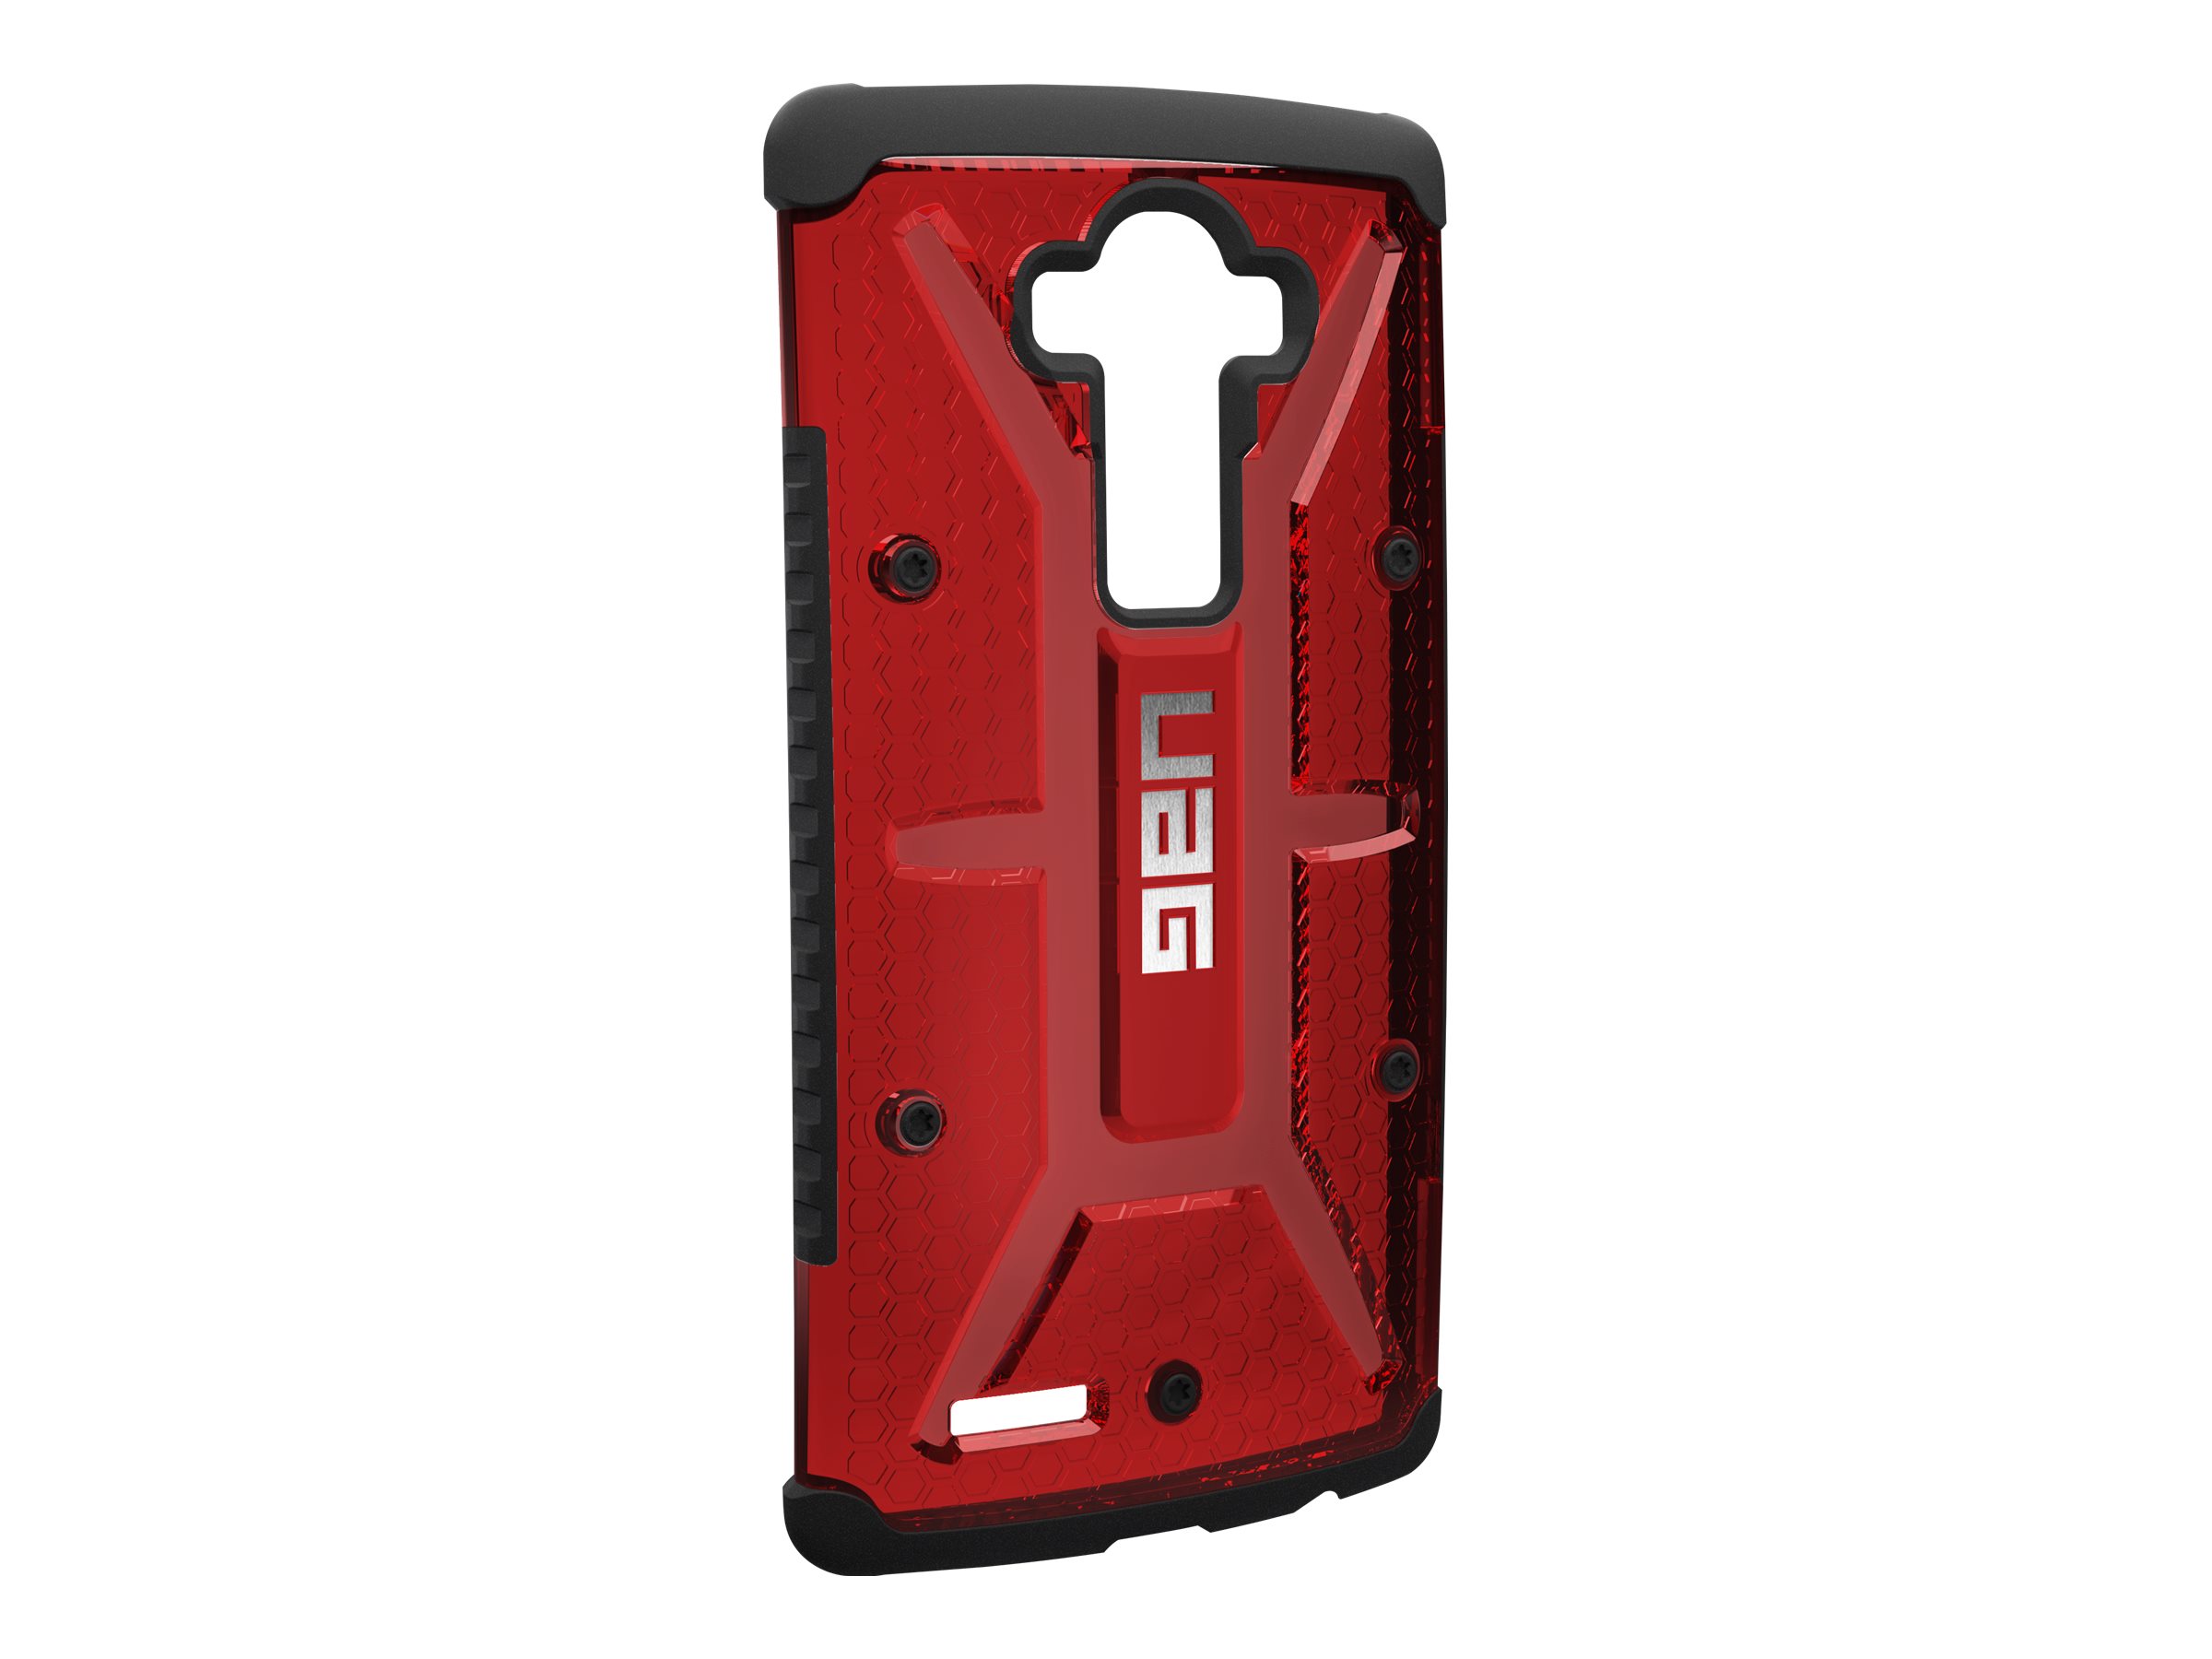 Urban Armor Gear Magma Case for LG G4 - image 5 of 5